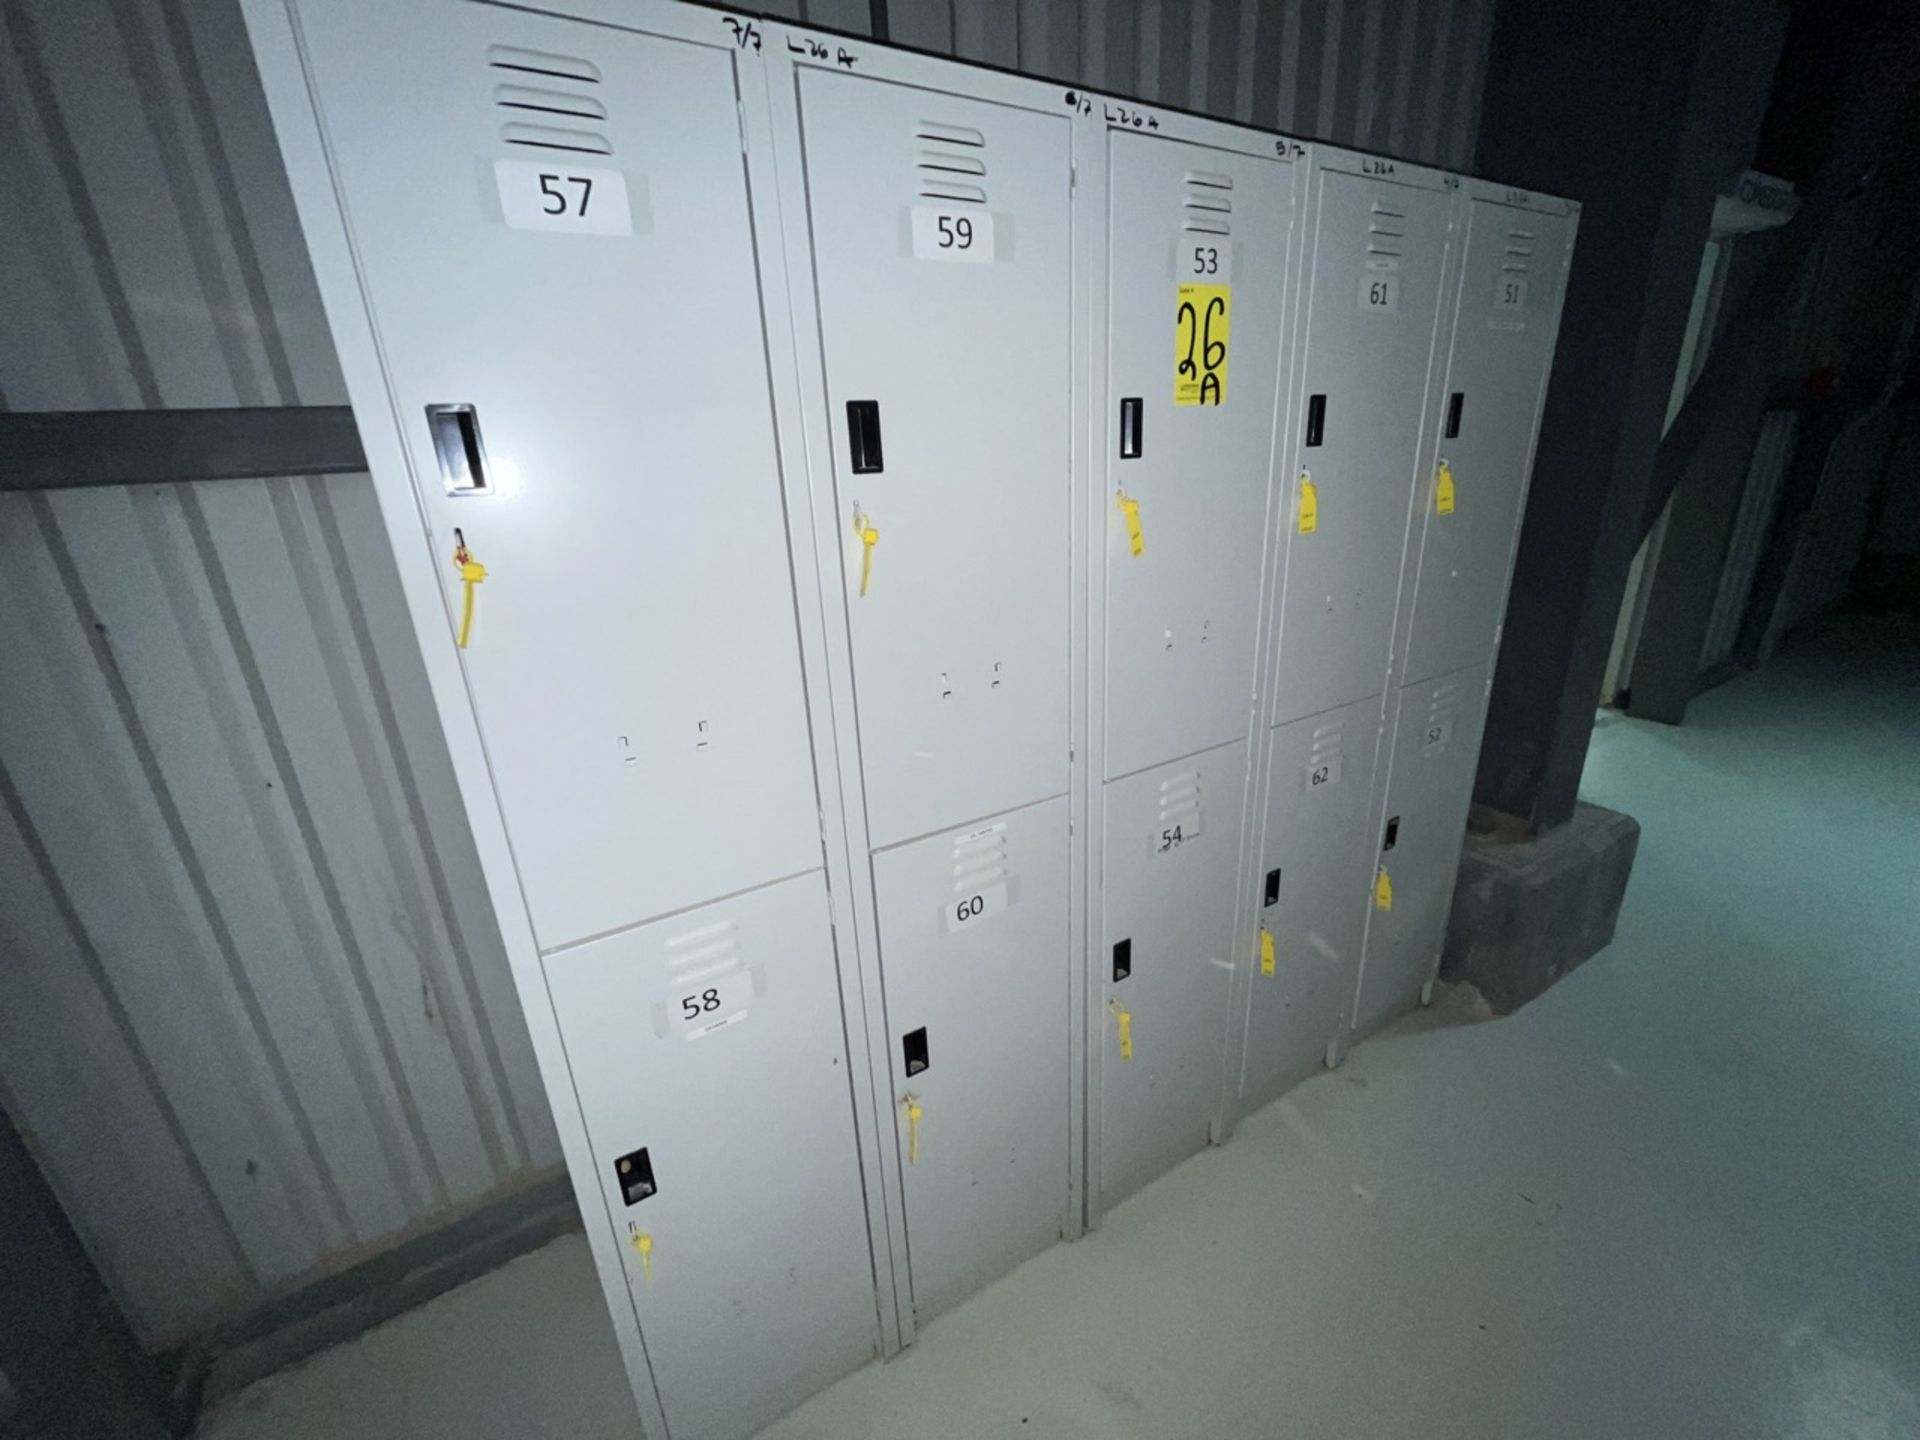 Lot of 7 storage lockers of 2 spaces each, measuring approximately 0.40 x 0.40 x 1.80 meters. / Lo - Image 4 of 8